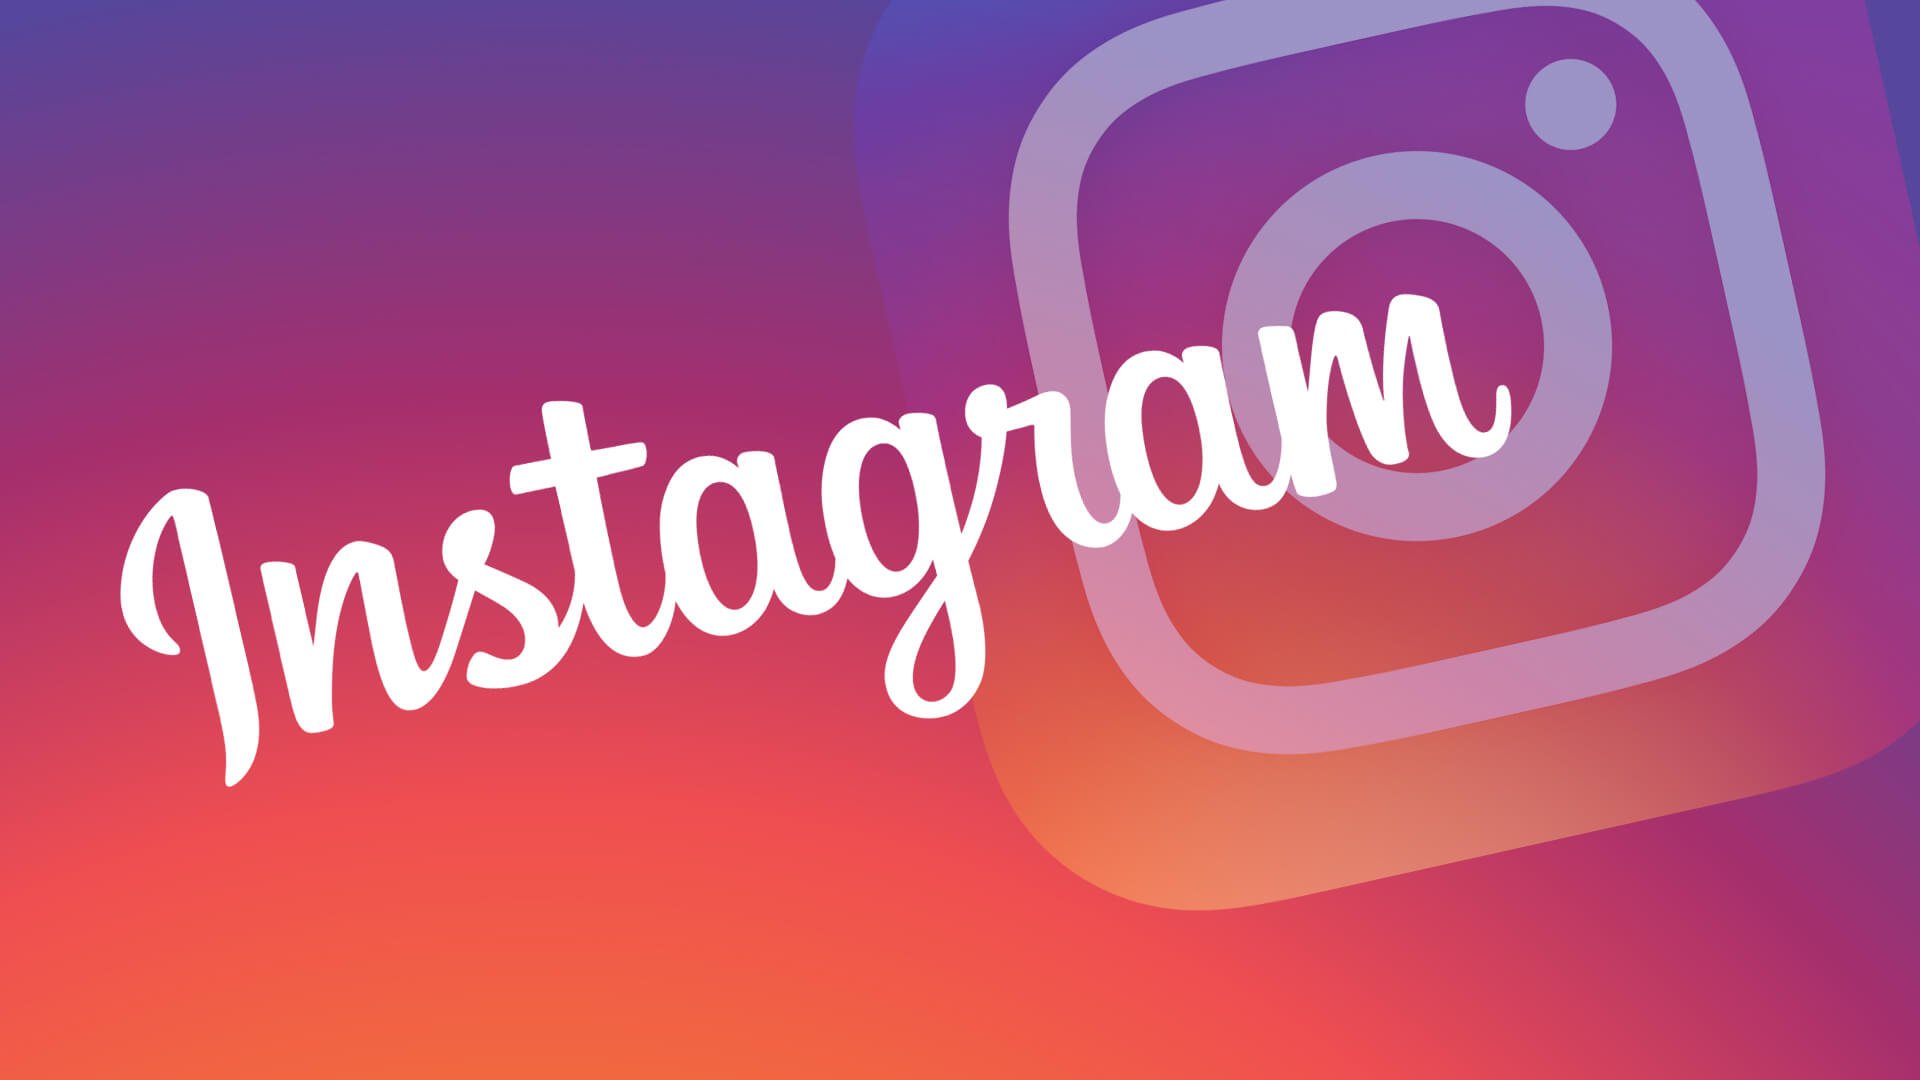 Authentic Engagement: Increase Instagram Followers Sustainably